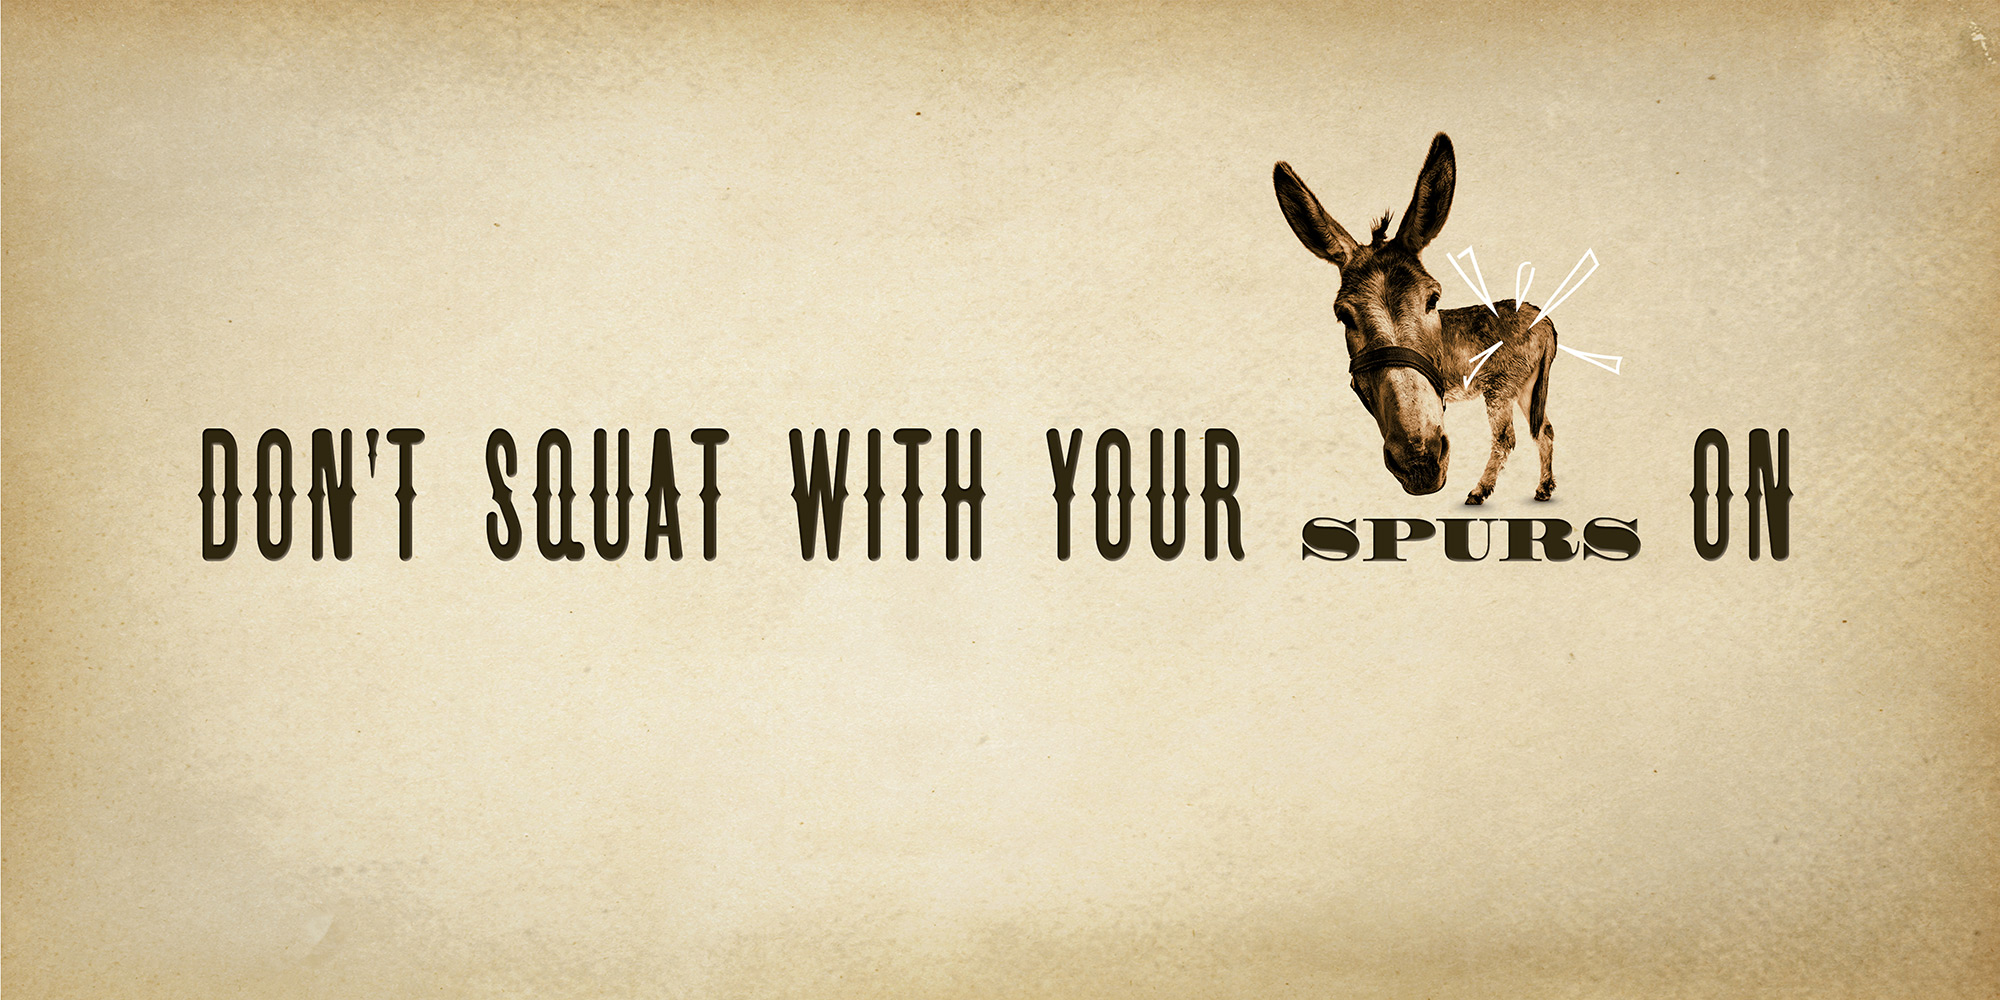 Jeff Kern design for "Dont Squat with Your Spurs On"